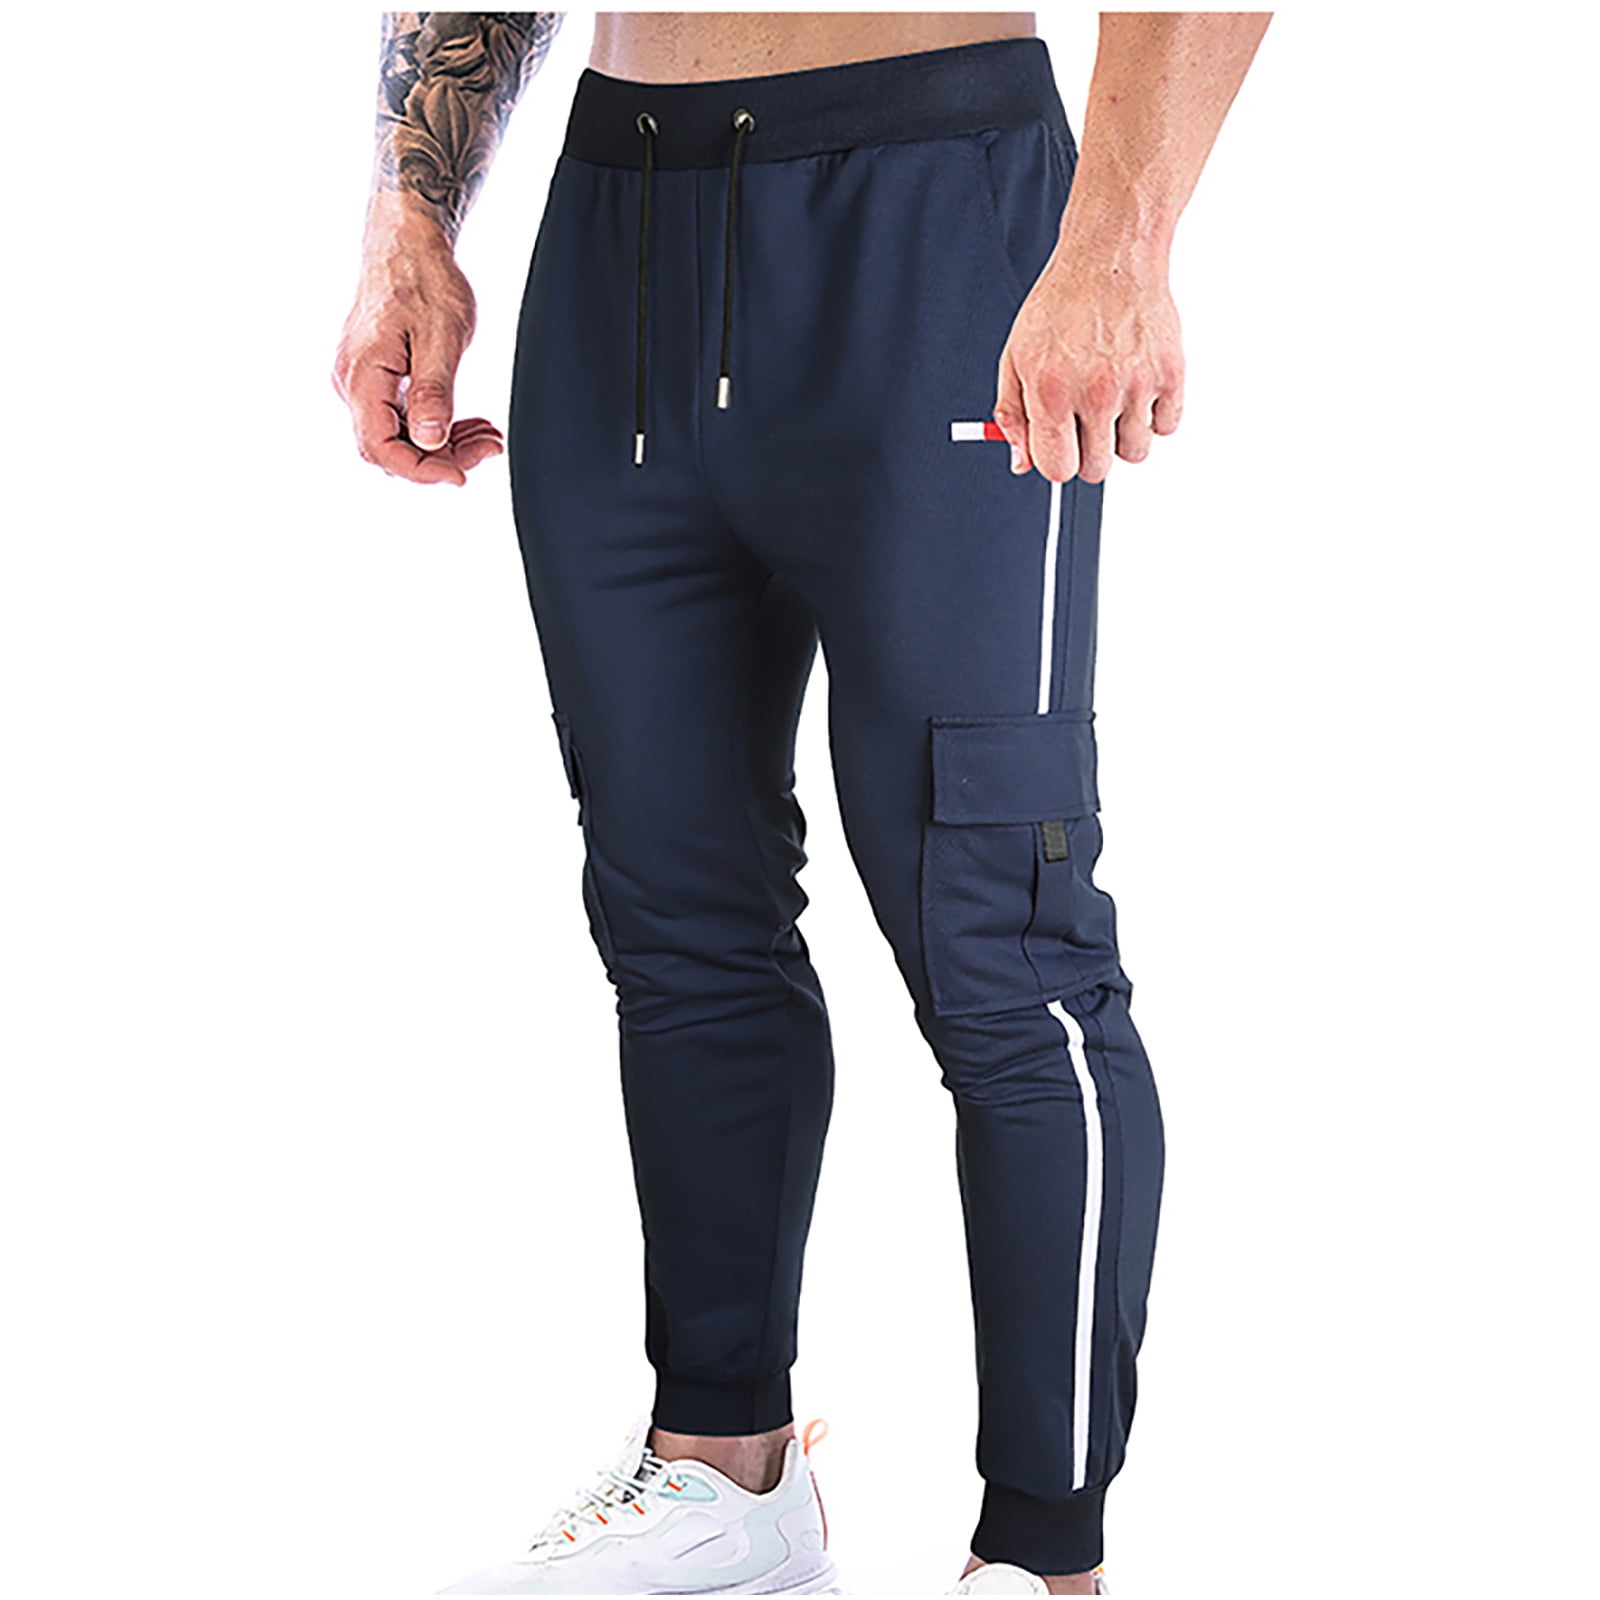  MANSDOUR Men's Athletic Gym Pants Workout Running Joggers Pants  Slim Fit Sport Track Pants Outdoor Jogging Sweatpants Casual Quick Dry  Tapered Training Trousers with Zipper Pockets : Clothing, Shoes & Jewelry